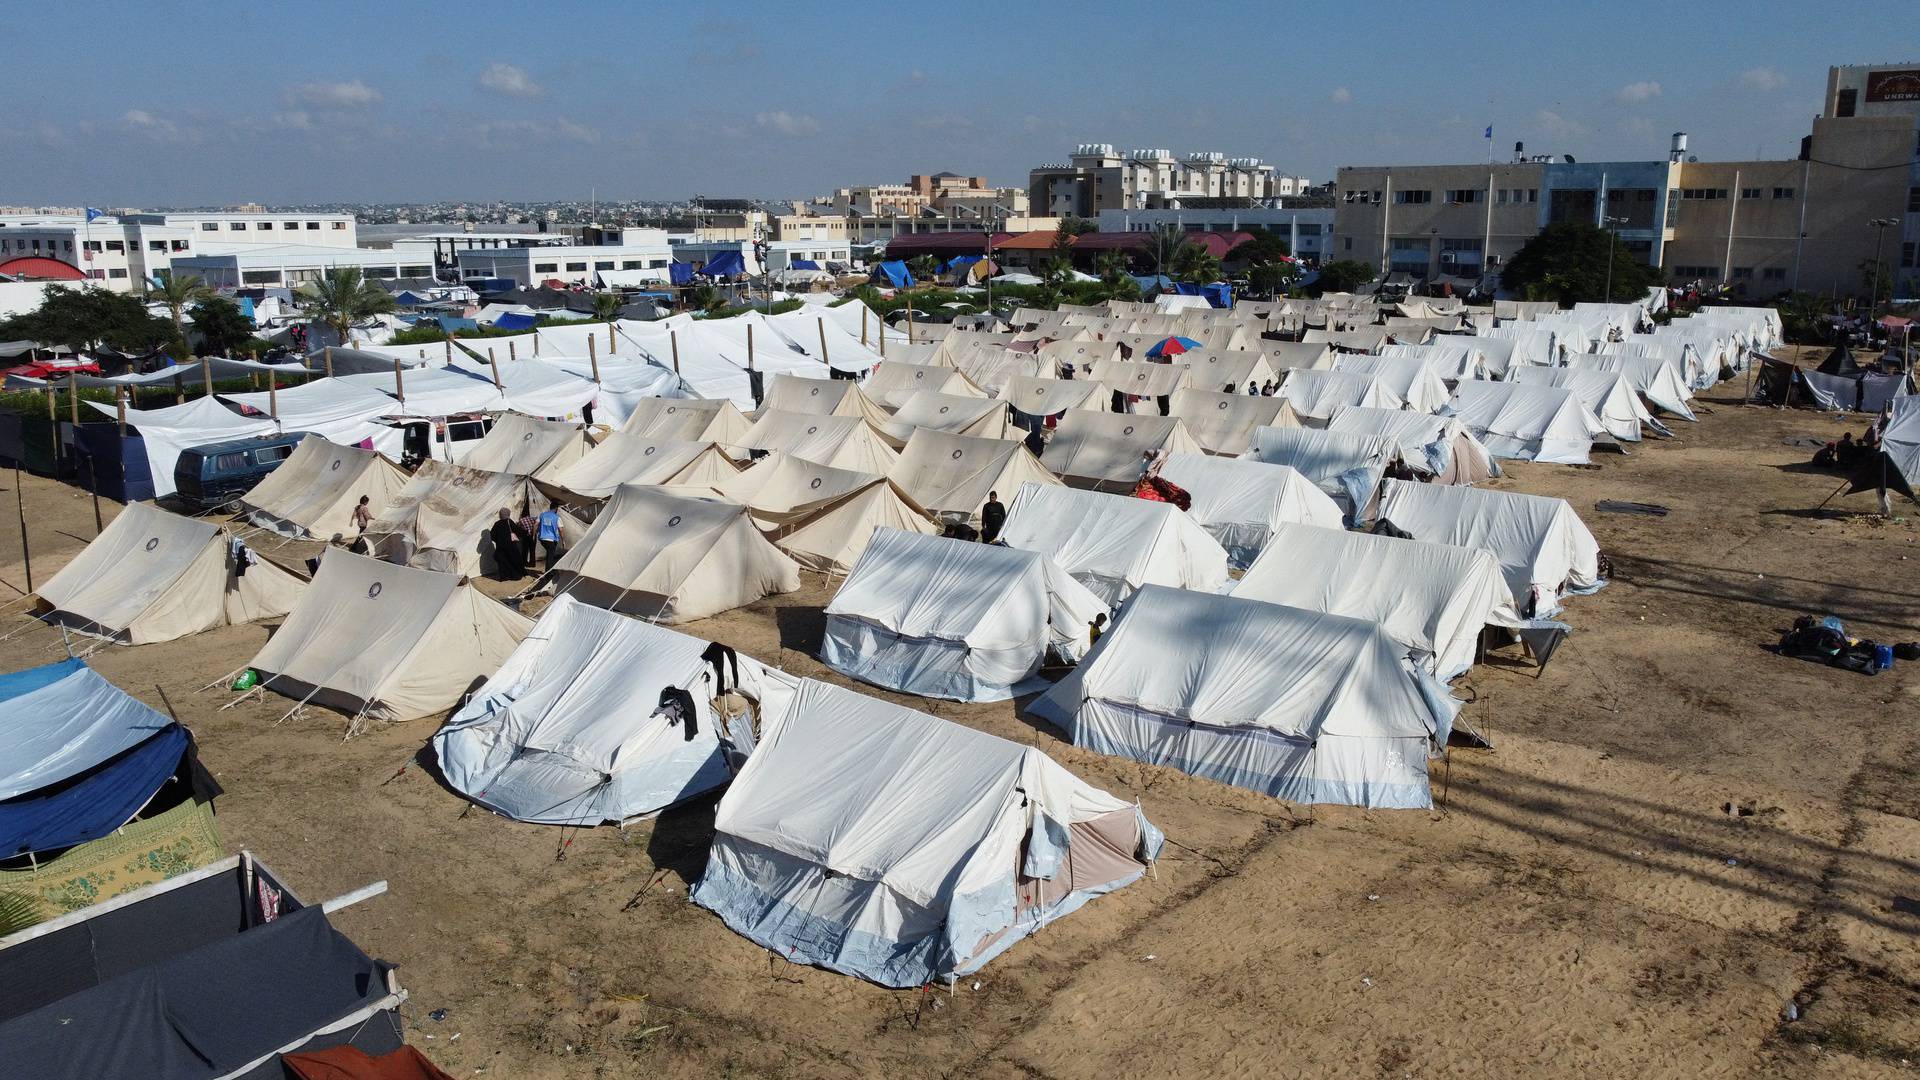 Palestinians, who fled their houses amid Israeli strikes, take shelter in a tent camp at a UN-run centre, in Khan Younis